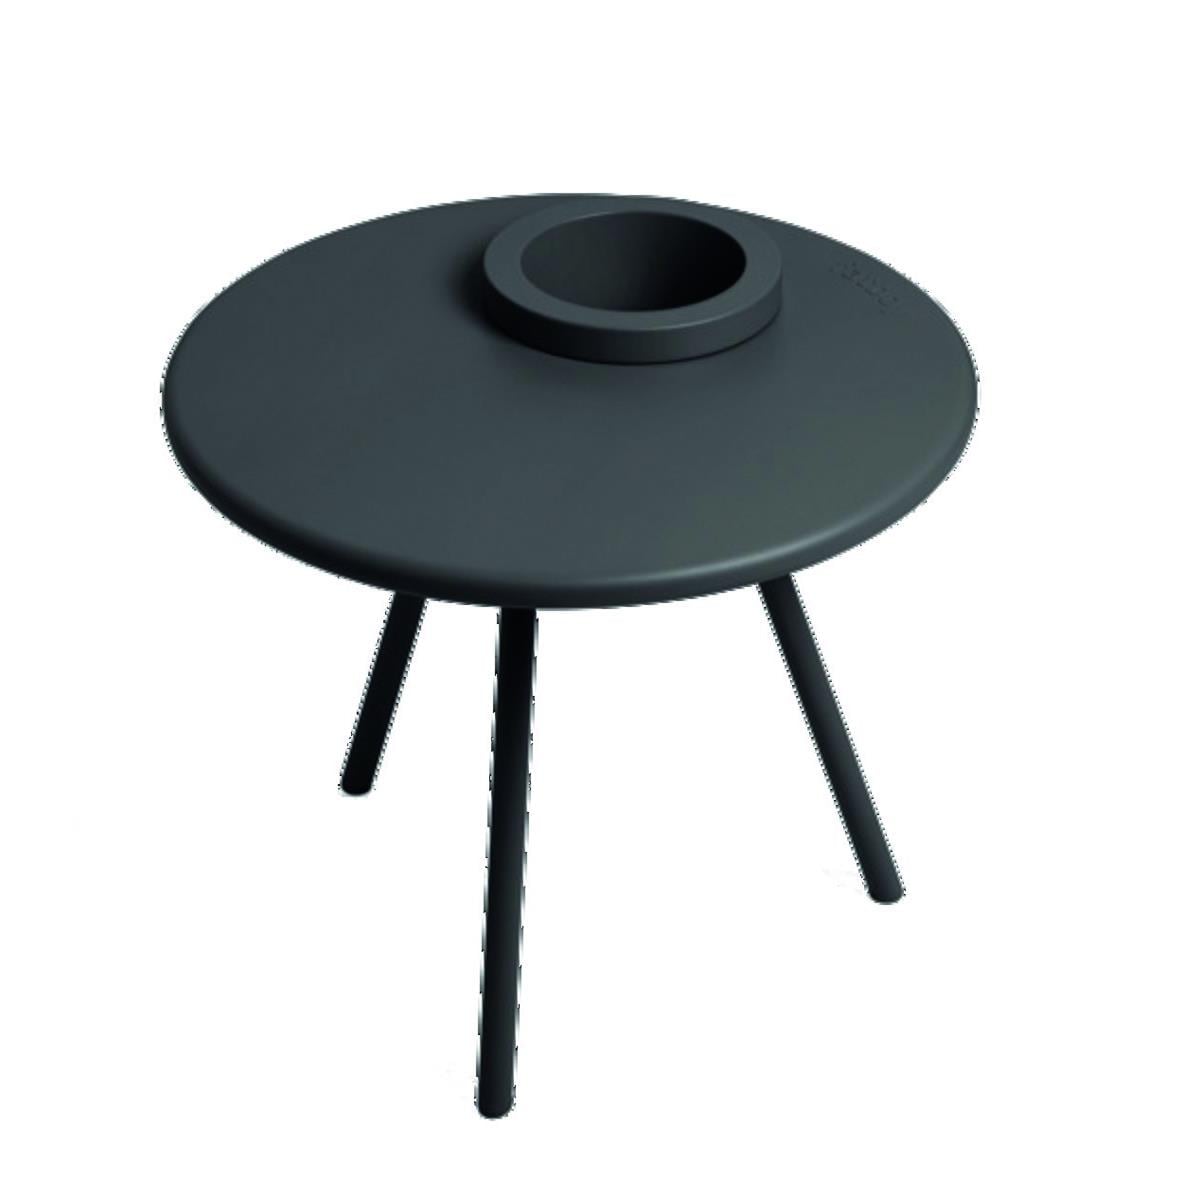 TABLE D'APPOINT BAKKES ANTHRACITE FATBOY